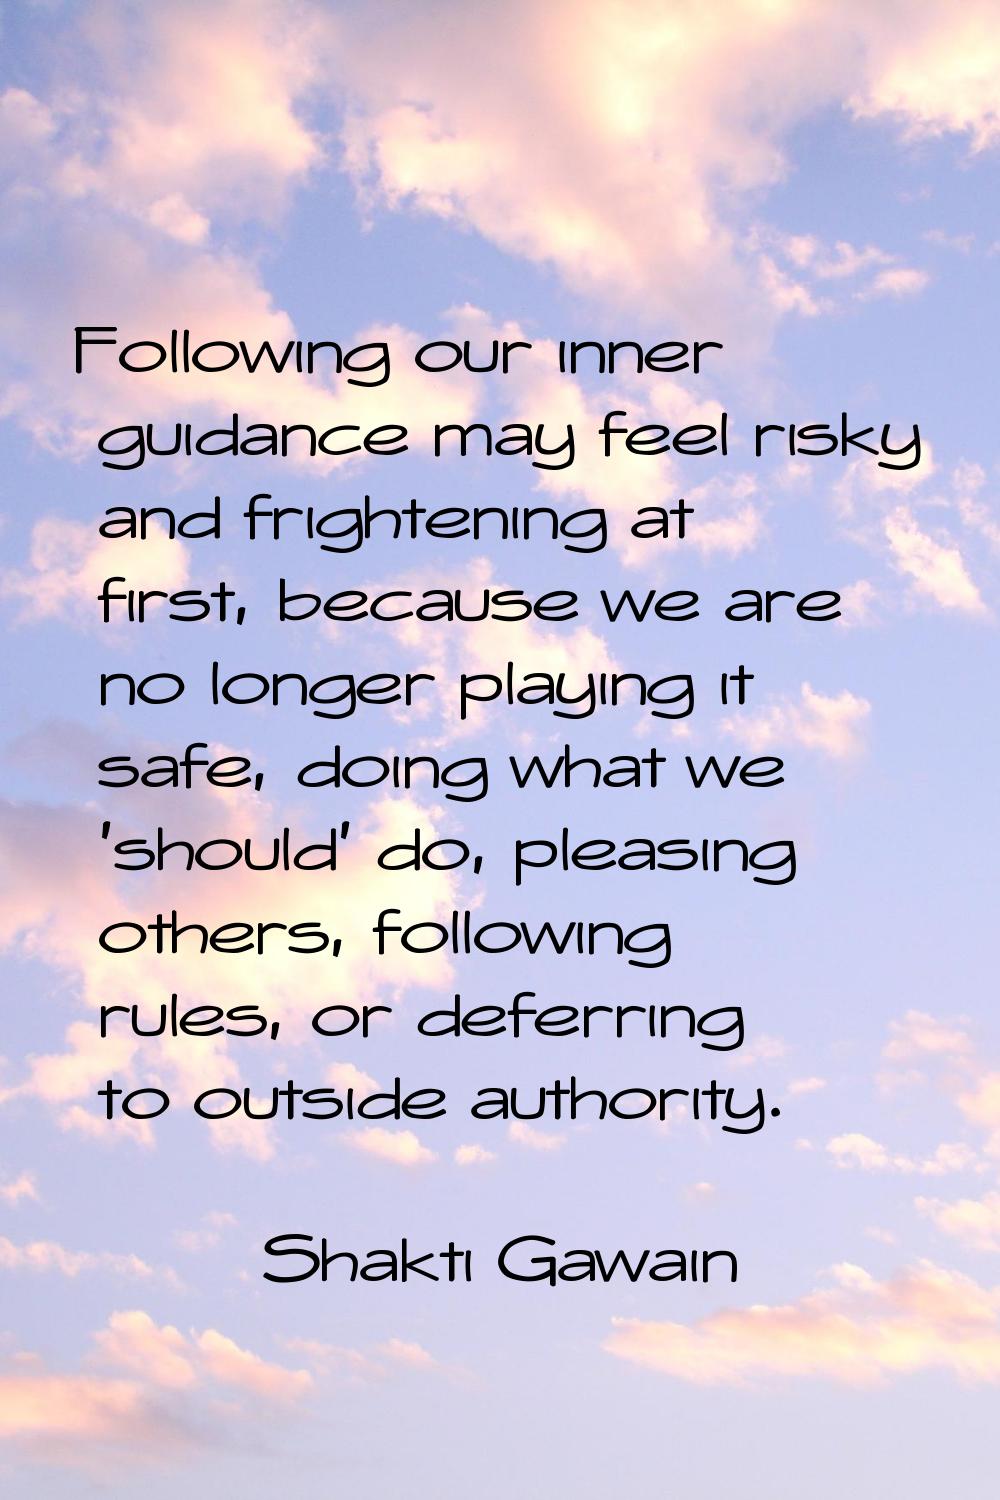 Following our inner guidance may feel risky and frightening at first, because we are no longer play